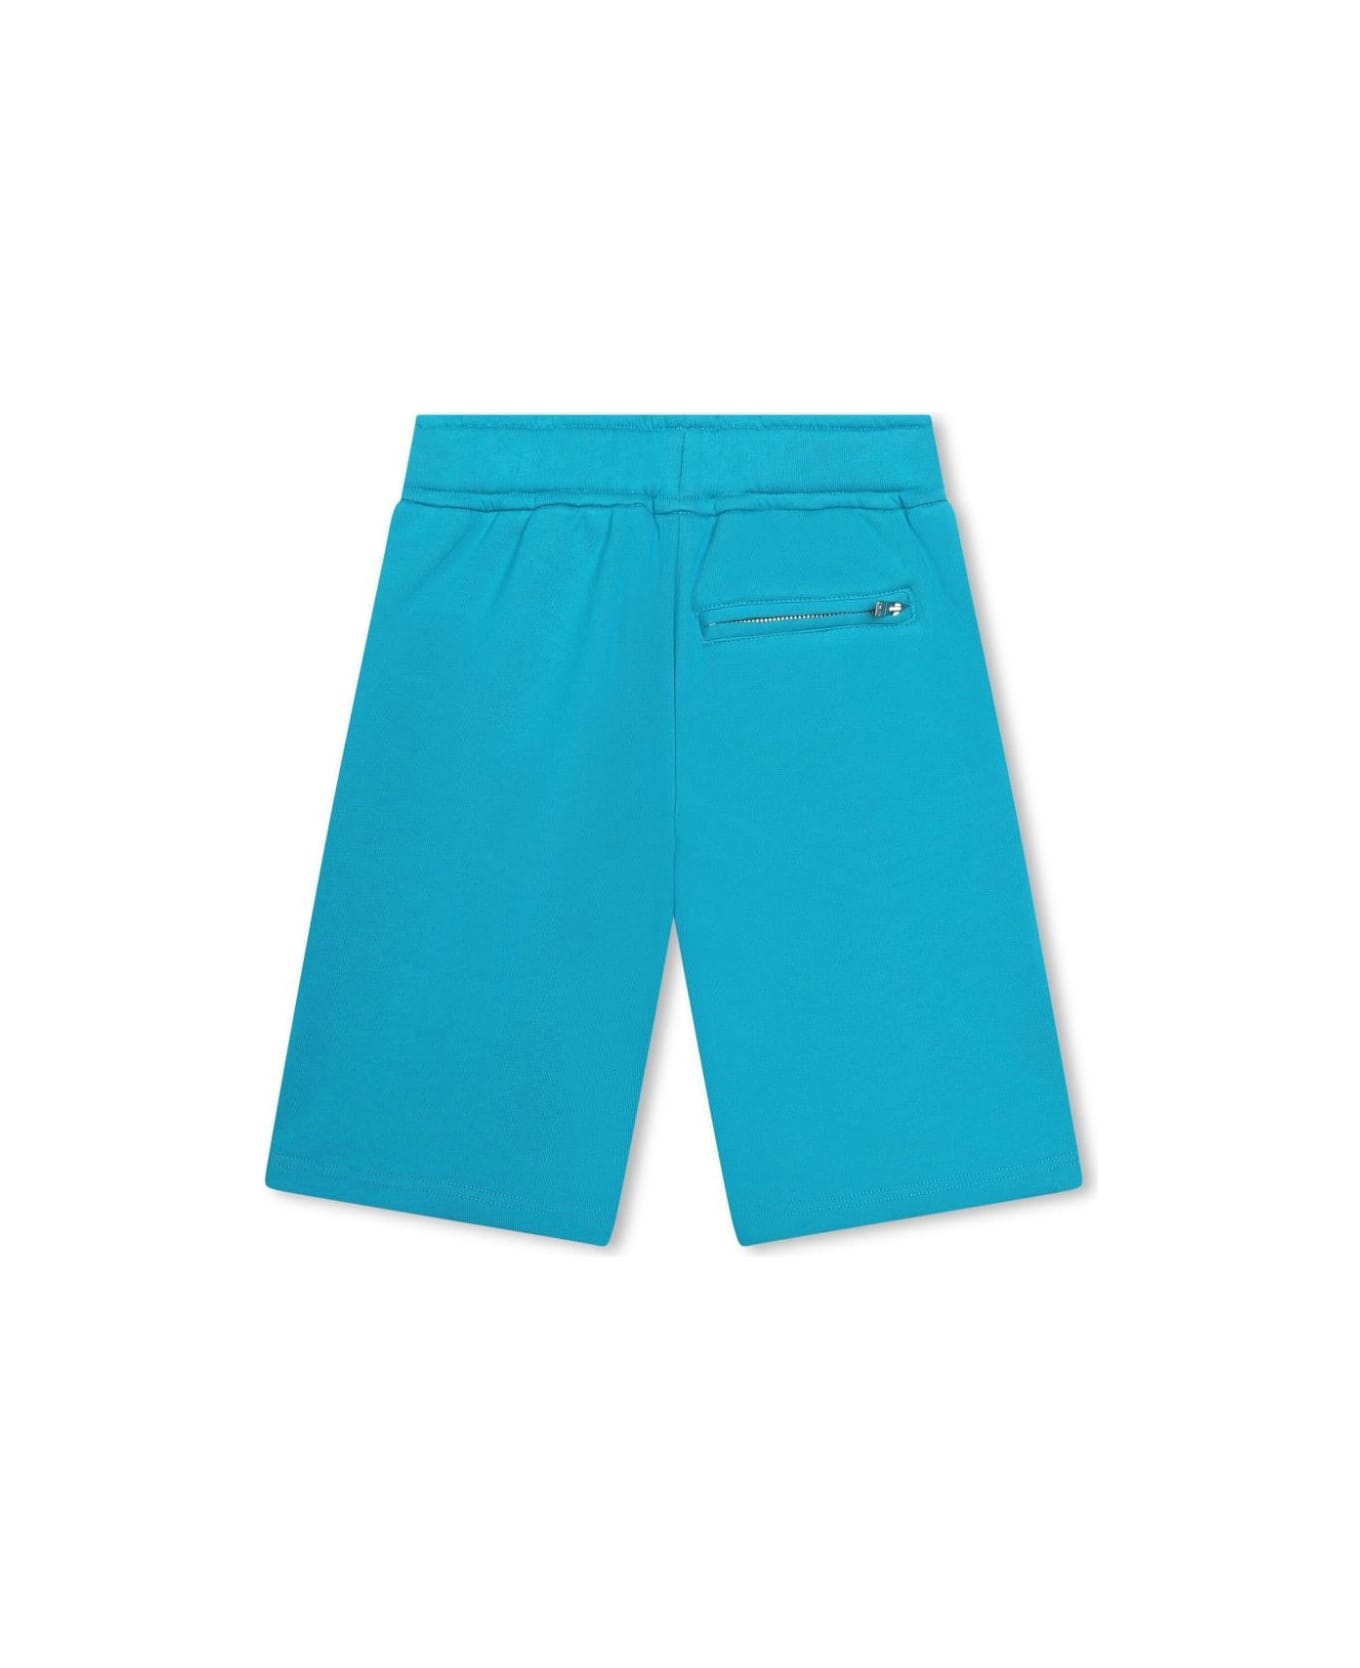 Lanvin Turquoise Shorts With Logo And "curb" Motif - Blue